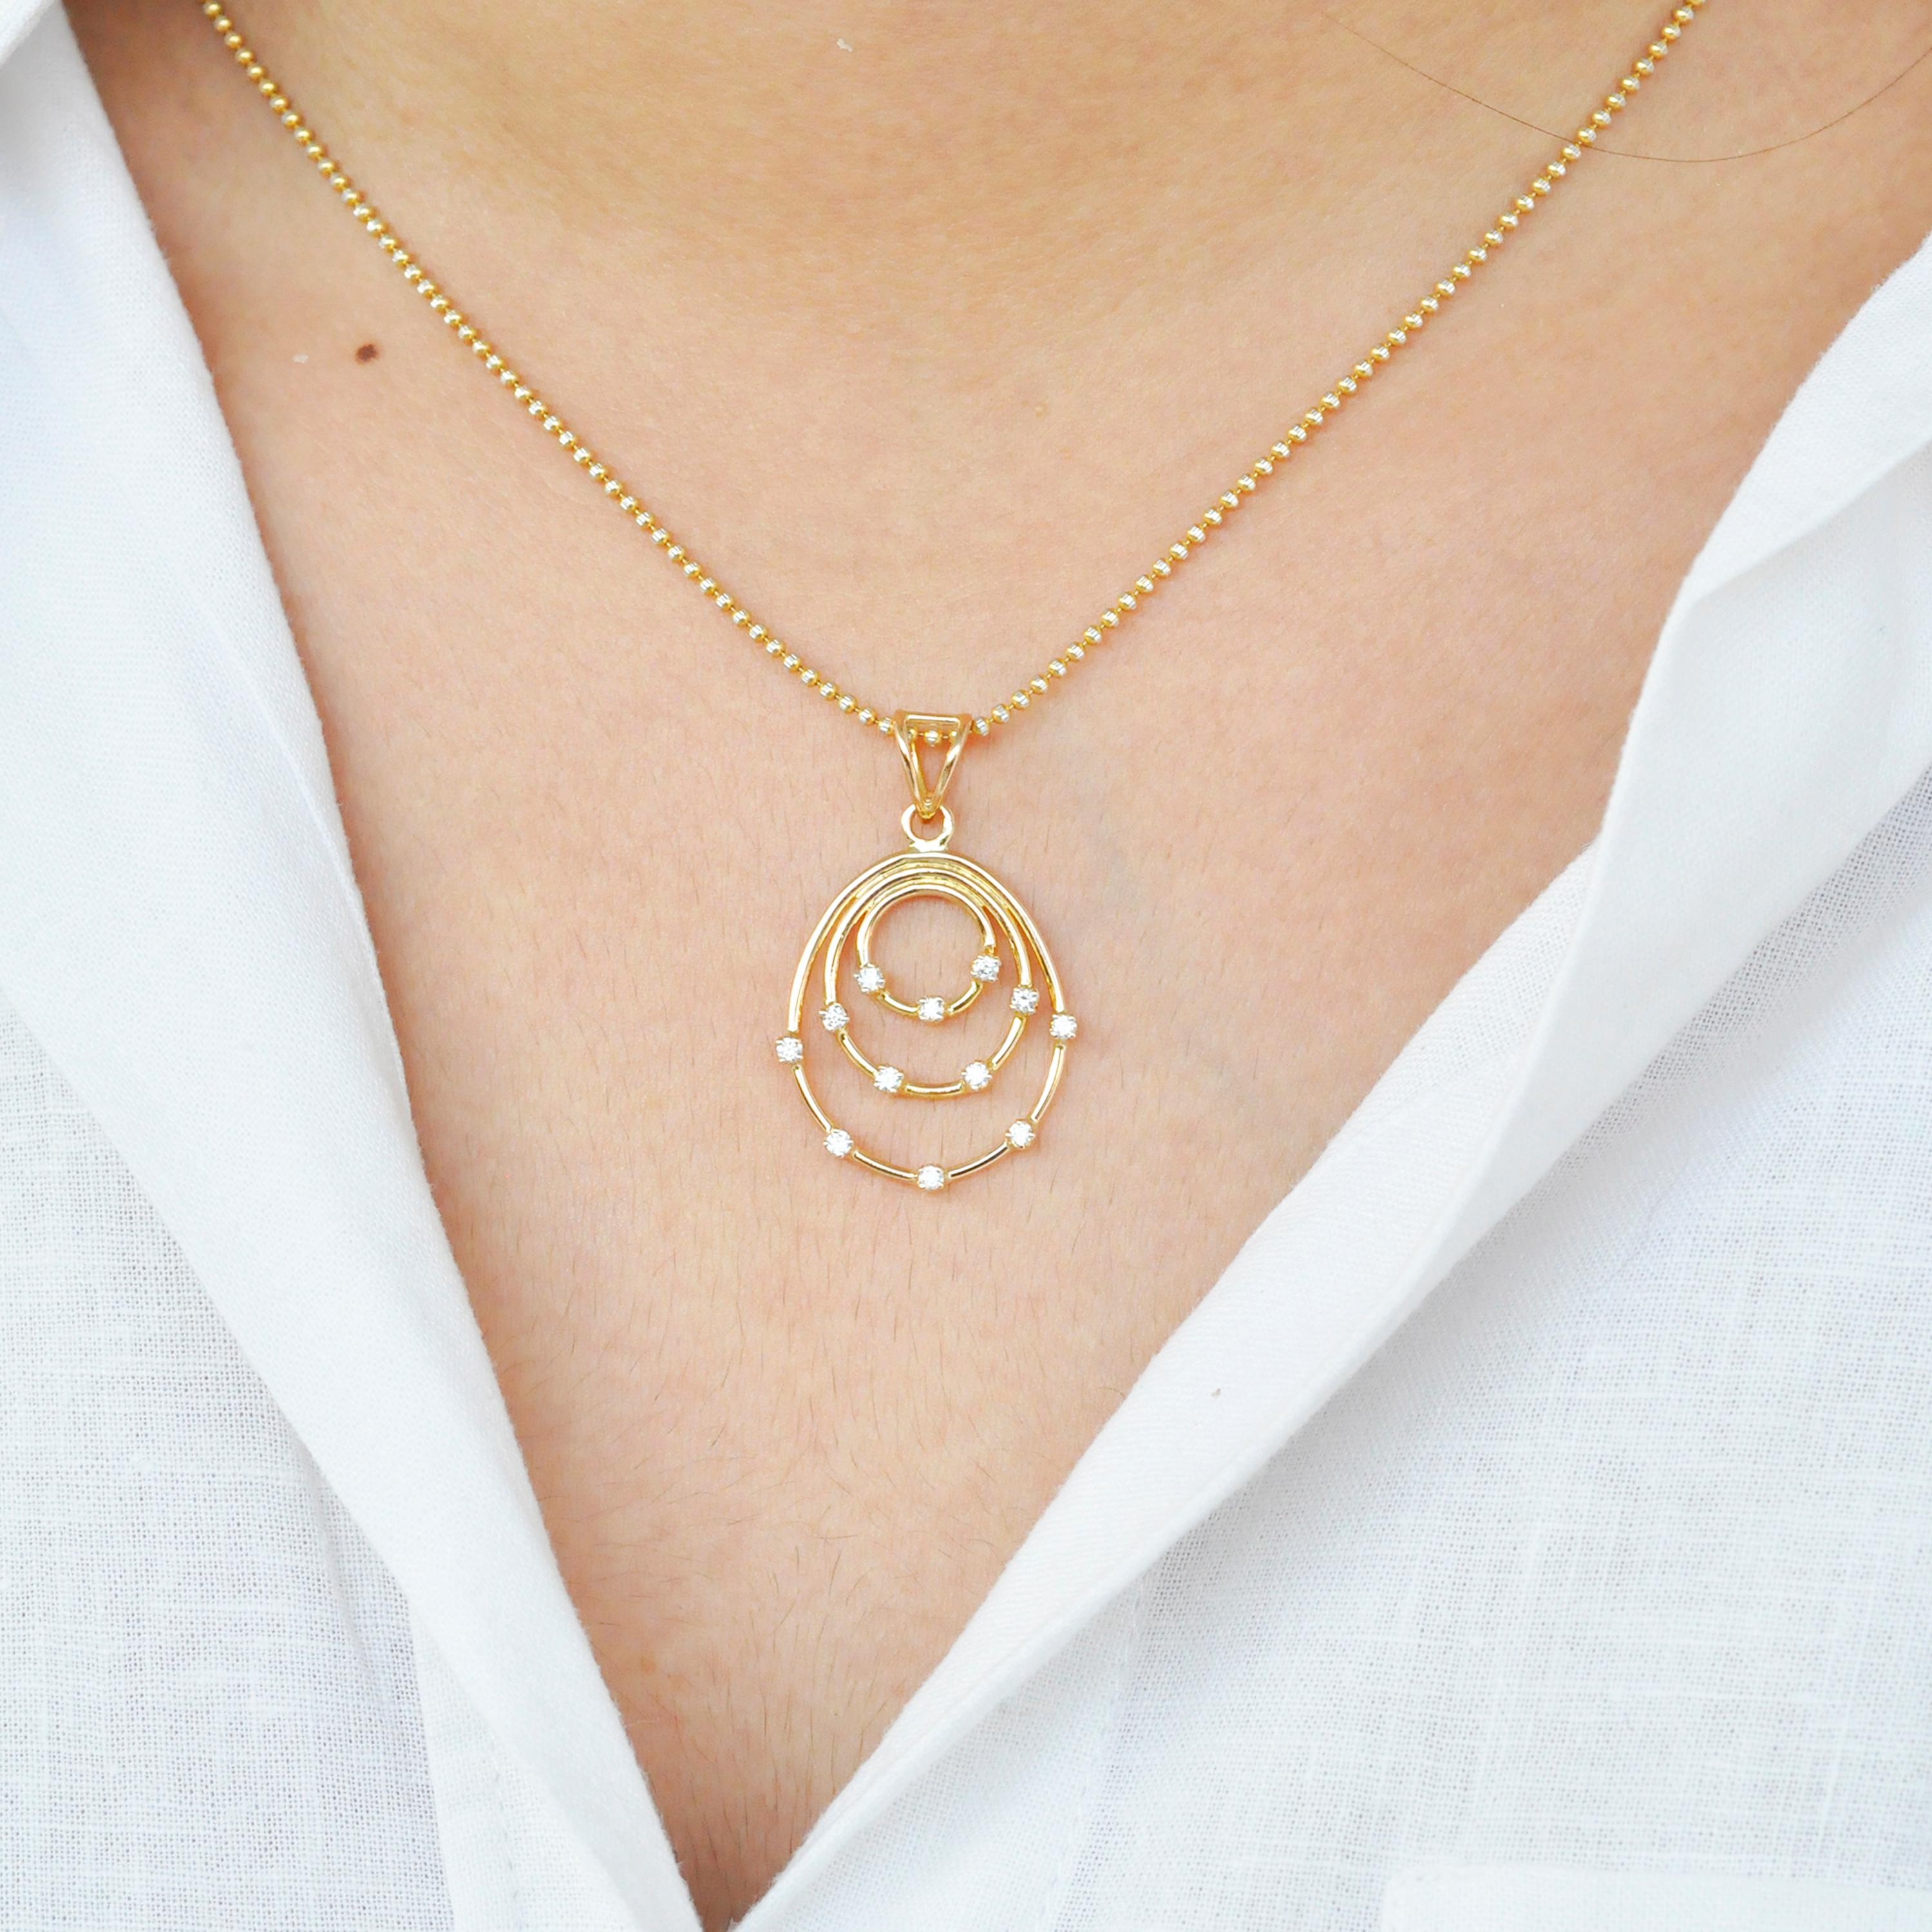 The beauty of this pendant lies in the simplicity of its construction. Concentric circular and oval gold rings with sprinkles of diamonds on it adds to the elegant beauty of this pendant. Perfect to be worn daily, this pendant will always feel